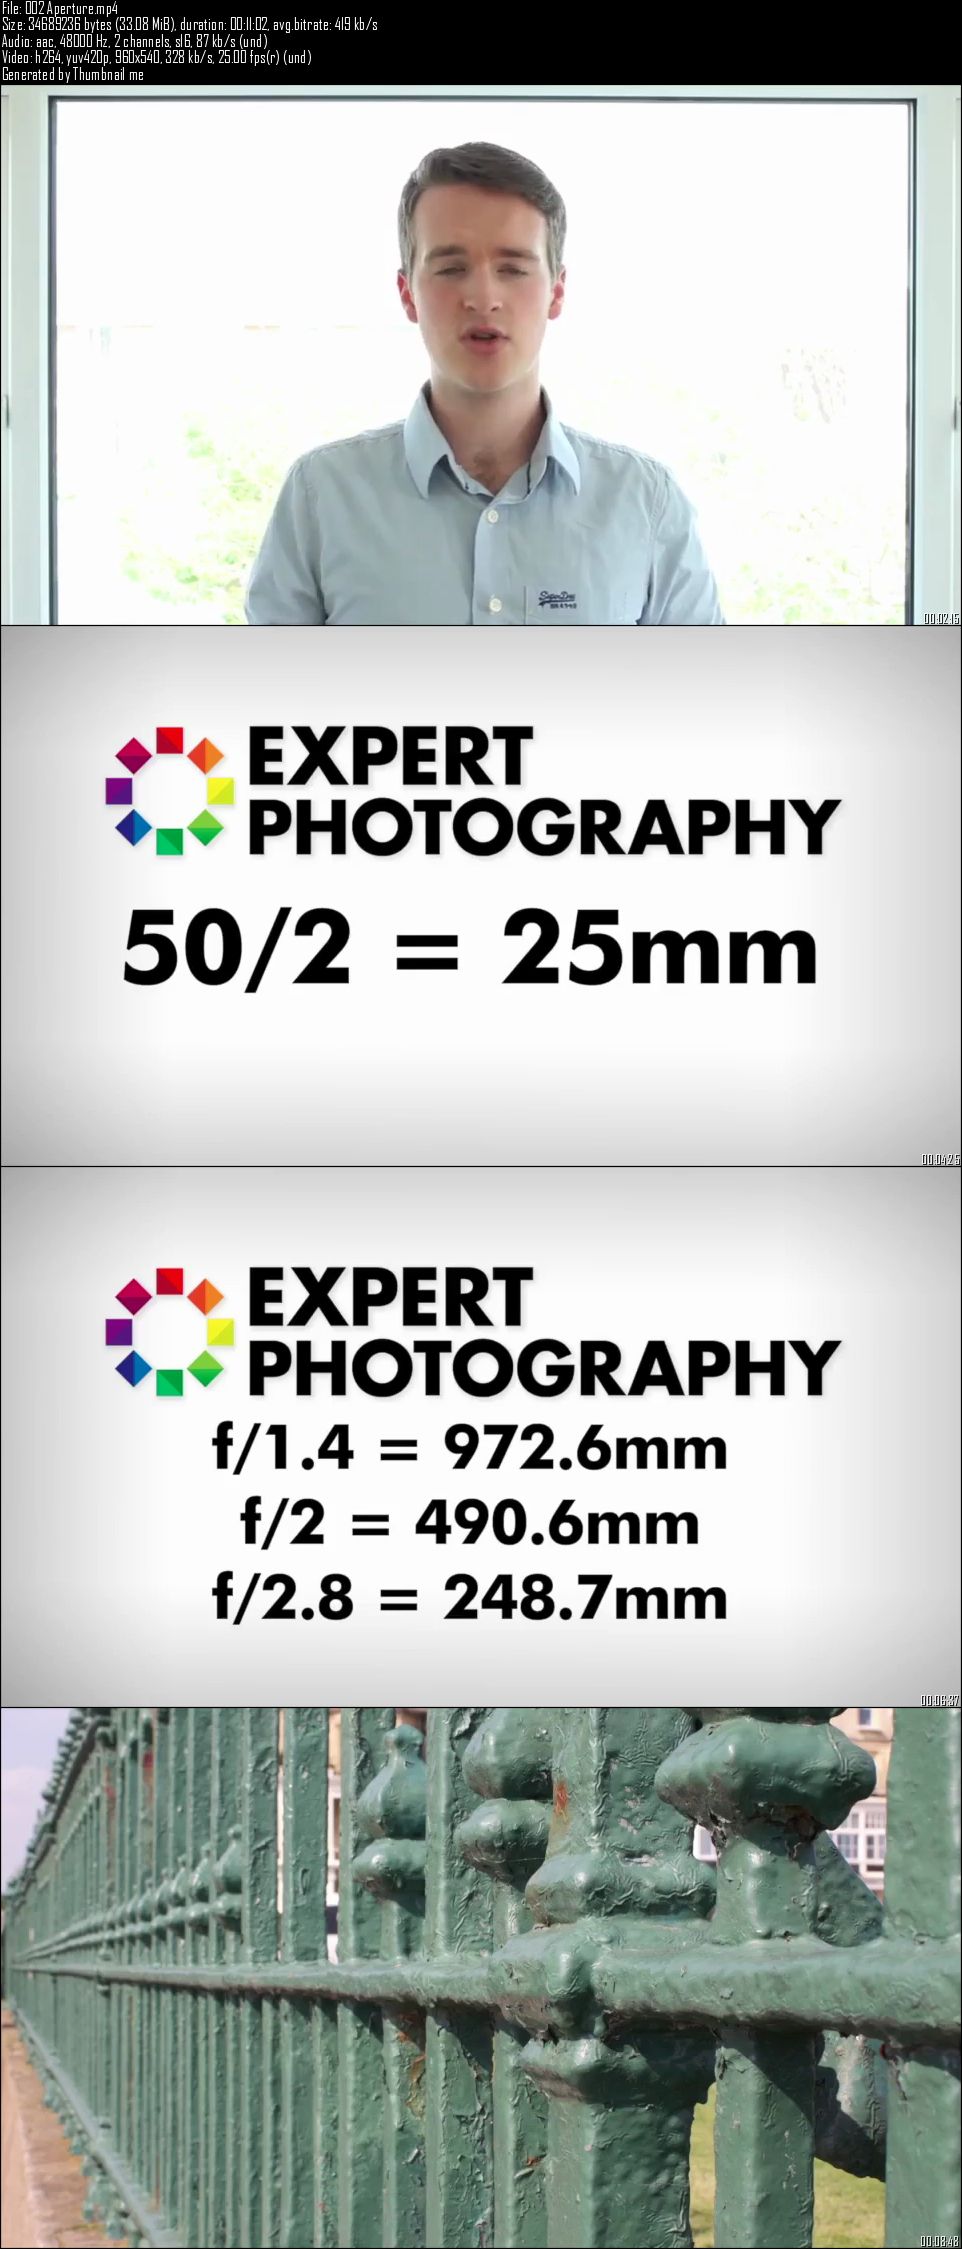 The Simplified System for Perfect Photography